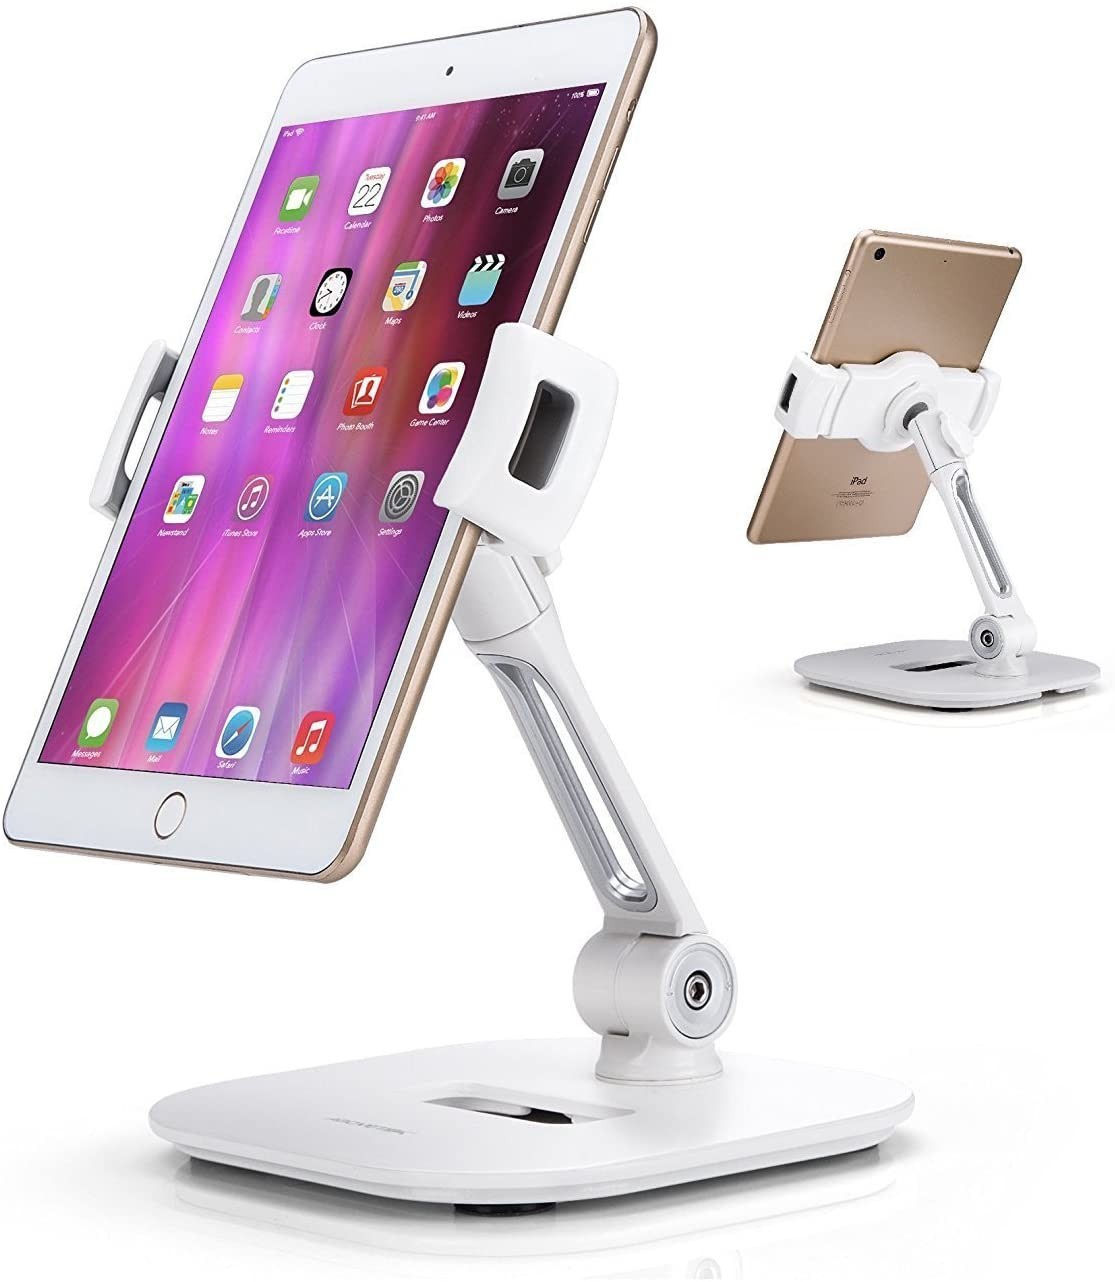 Stylish Aluminum Tablet Stand, Cell Phone Stand, Folding 360° Swivel iPad iPhone Desk Mount Holder